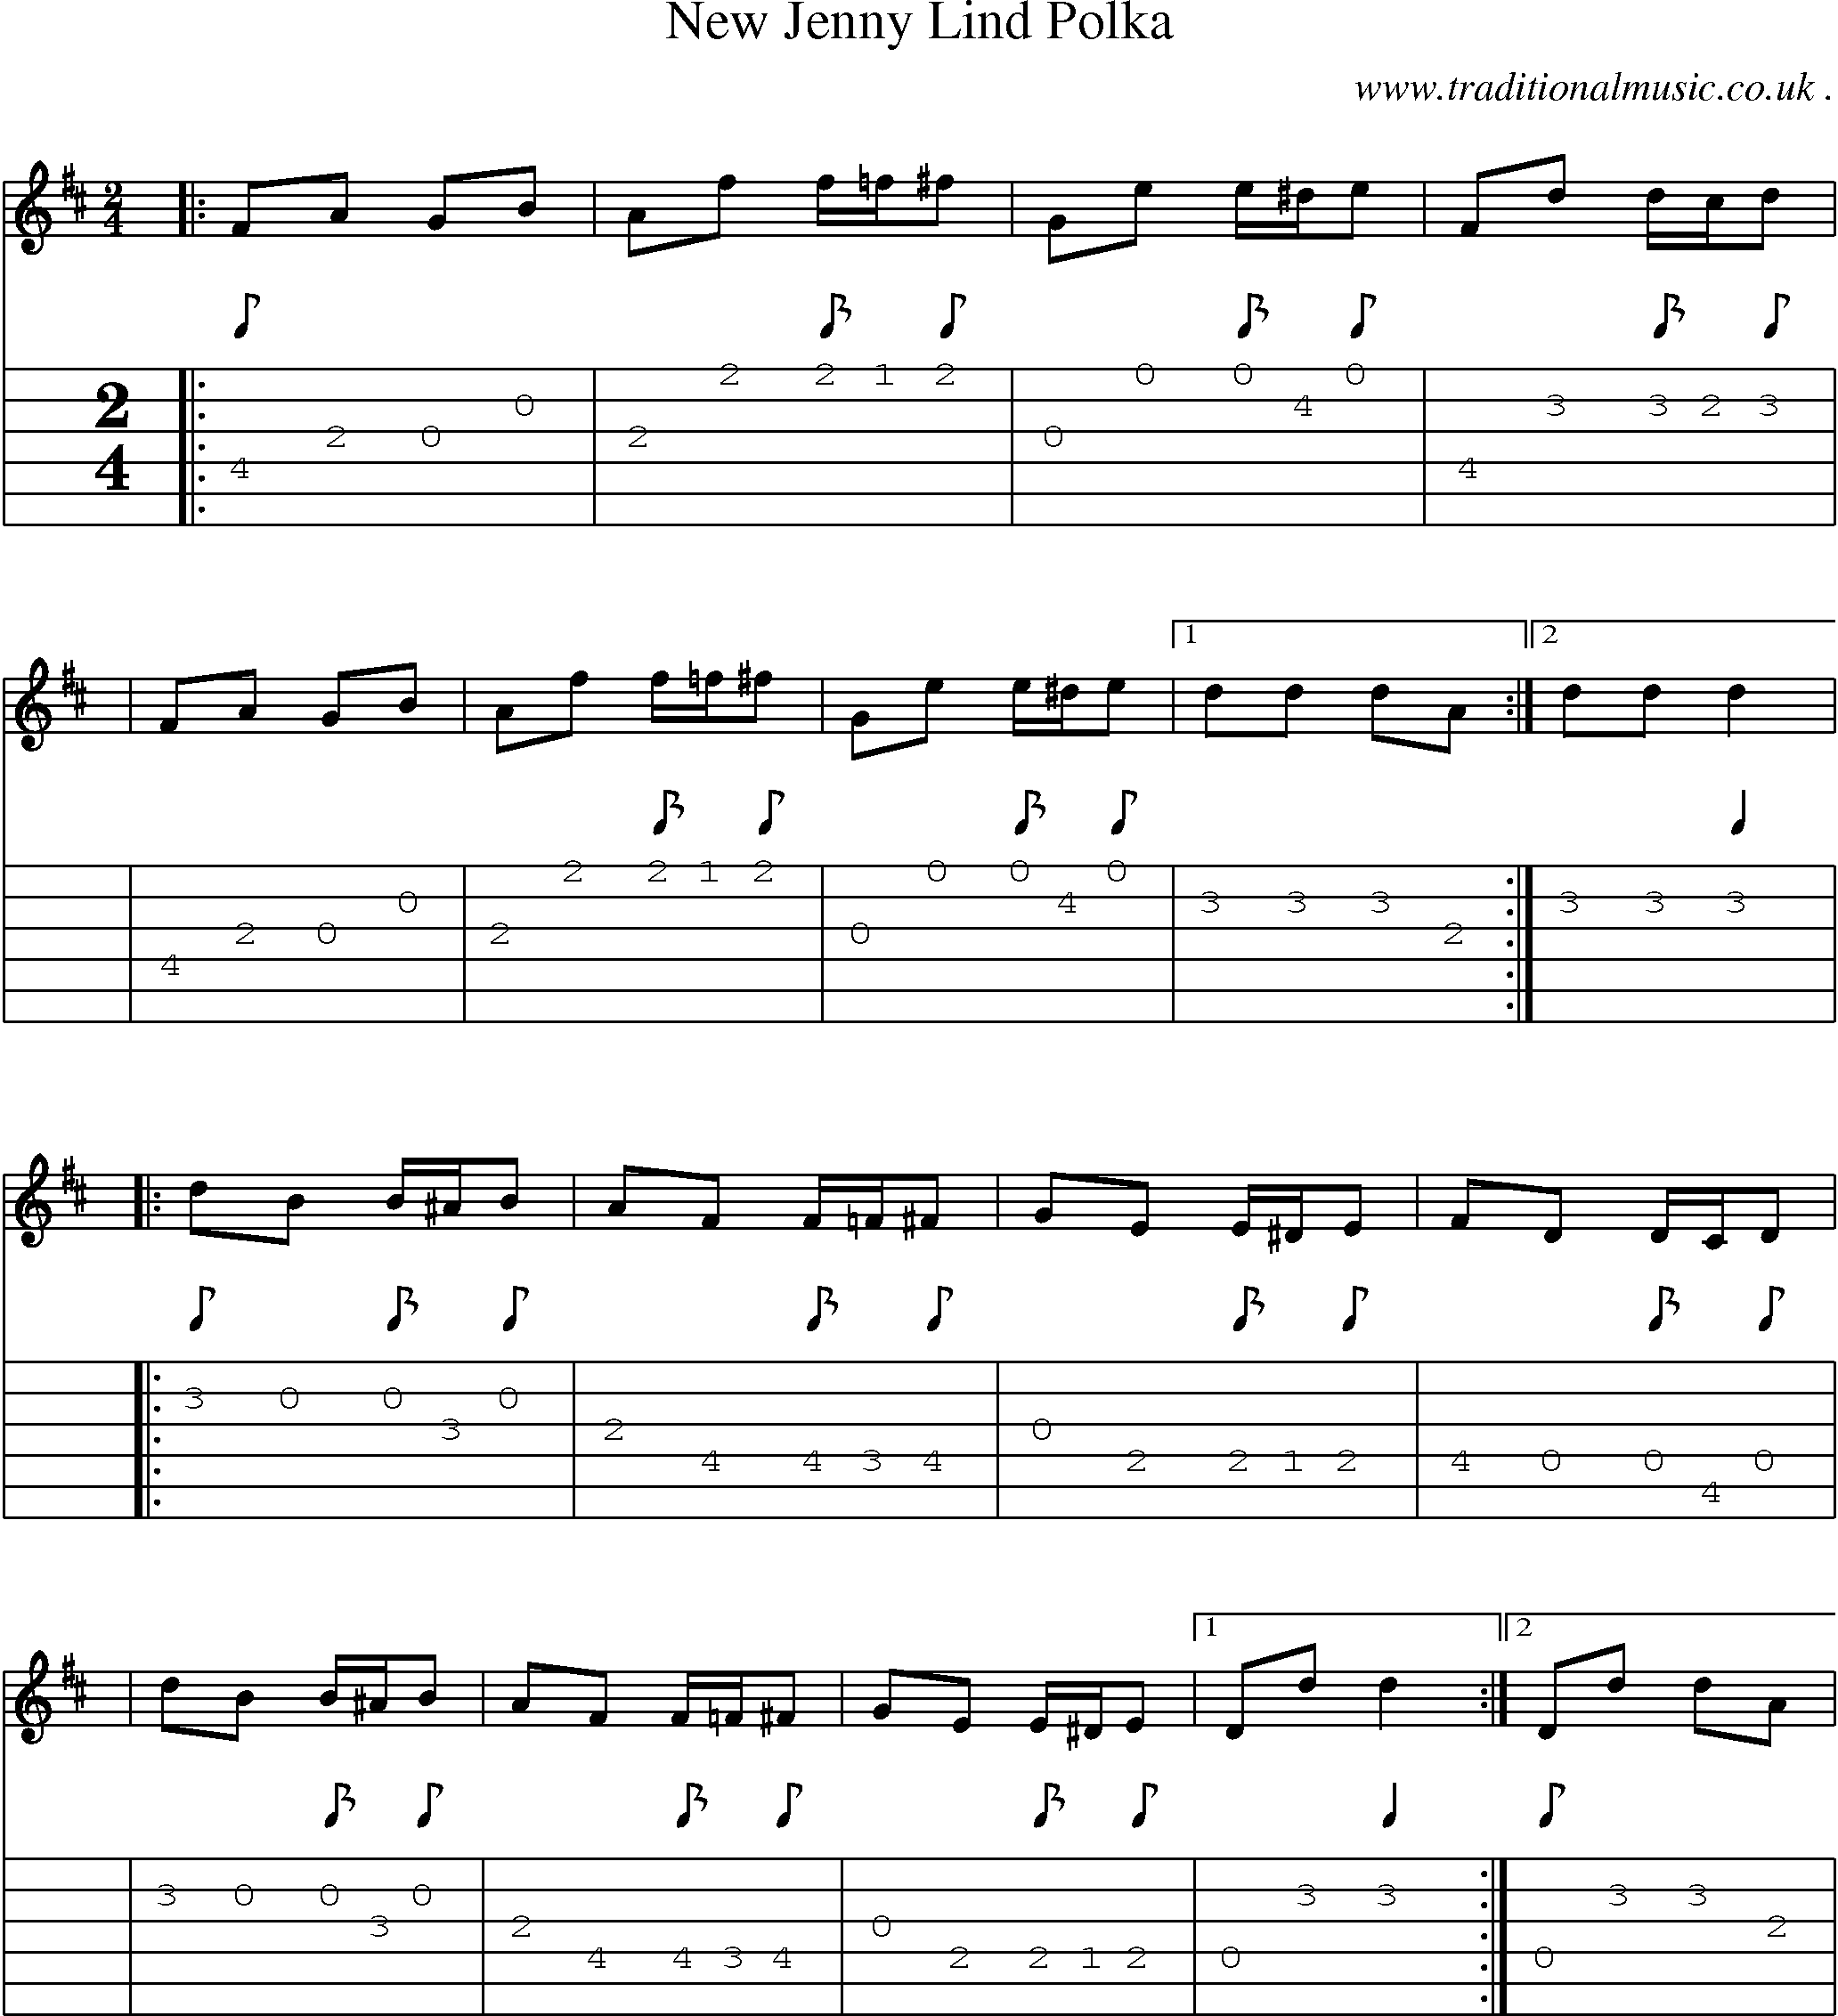 Sheet-Music and Guitar Tabs for New Jenny Lind Polka